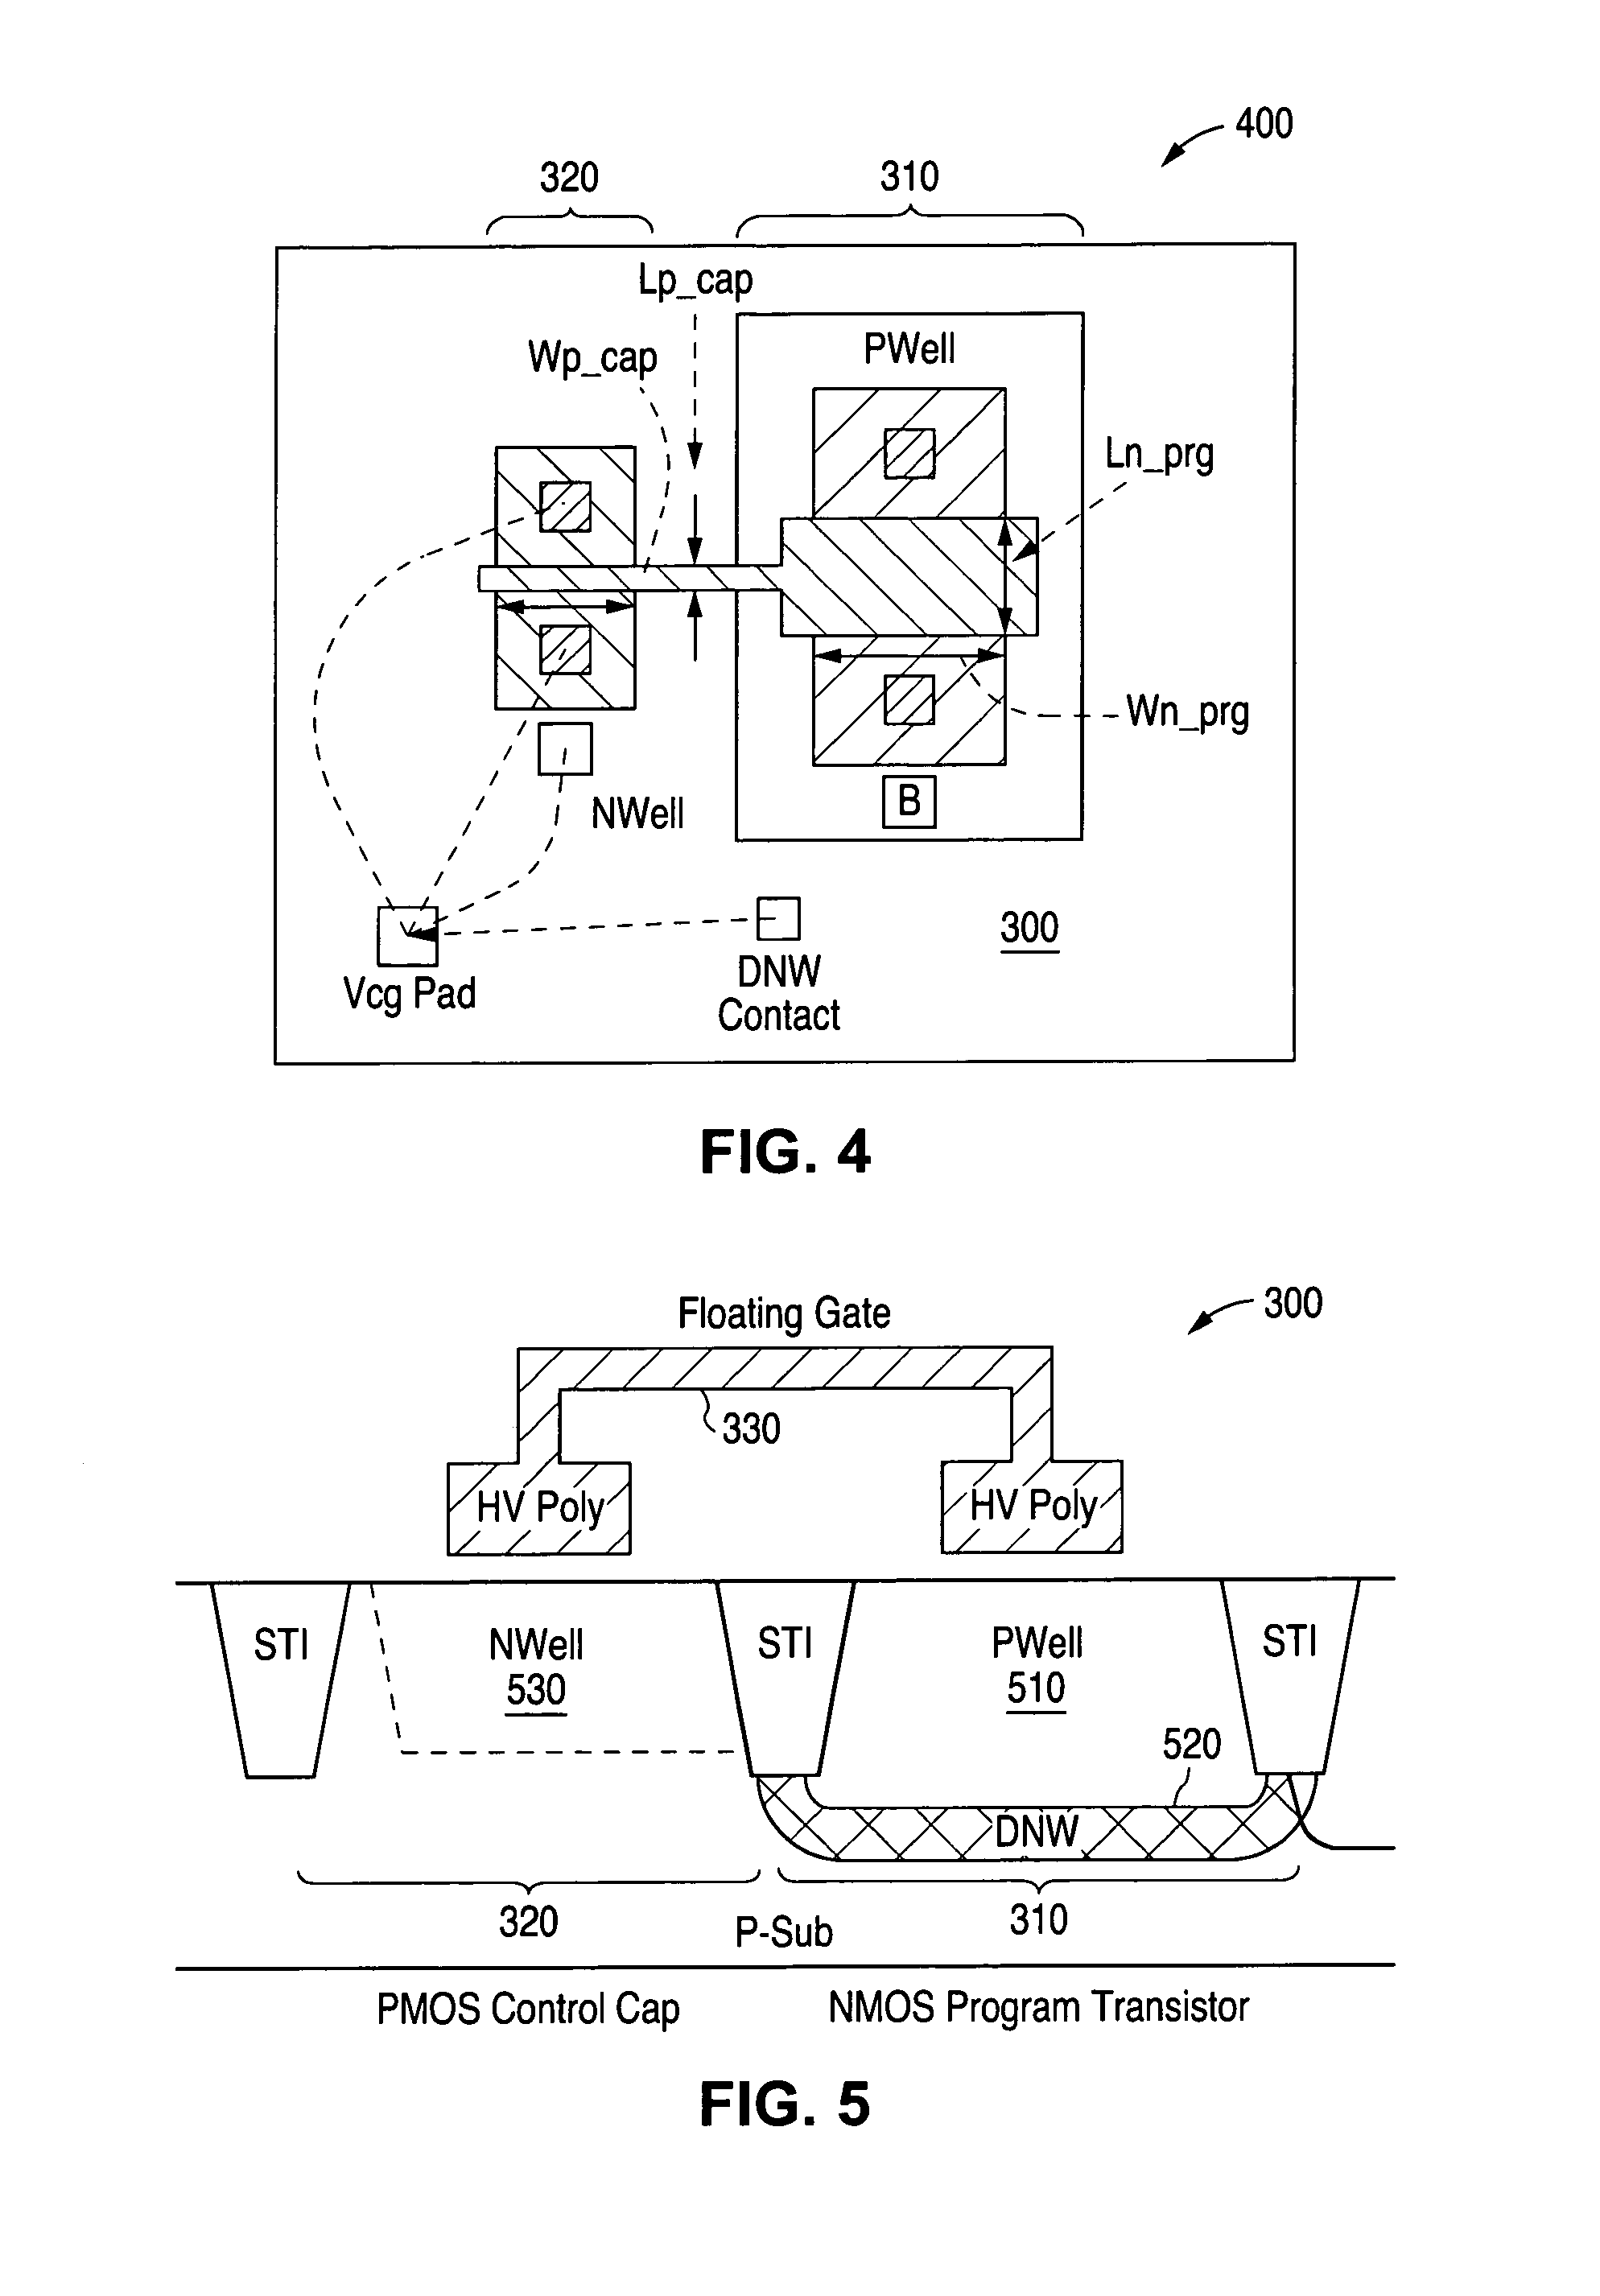 System and method for providing a CMOS compatible single poly EEPROM with an NMOS program transistor